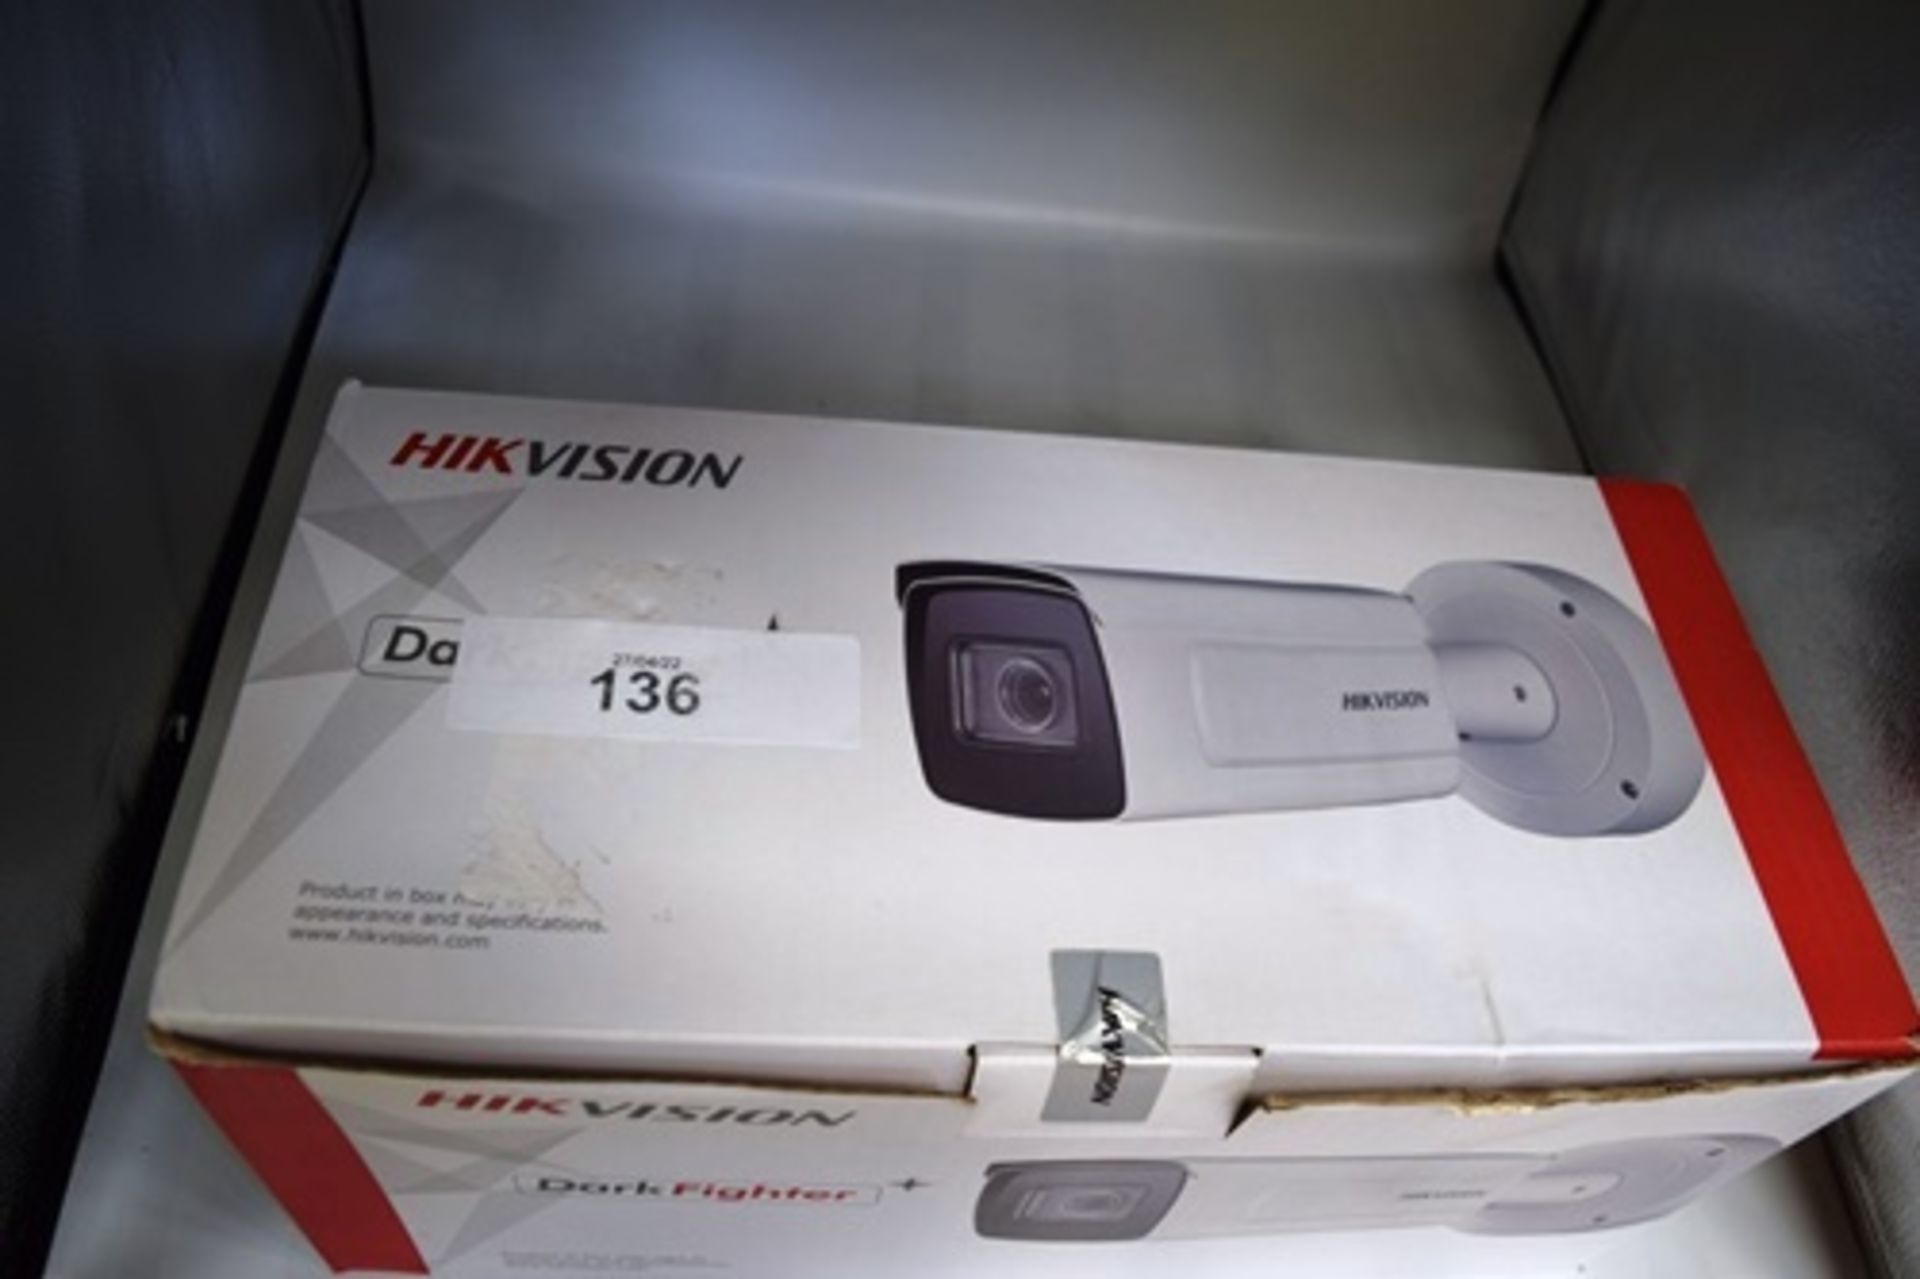 1 x Hikvision Dark Fighter network camera, model DS-2CD5A46GO-IZS 2.8-12mm 4MP - Sealed new in